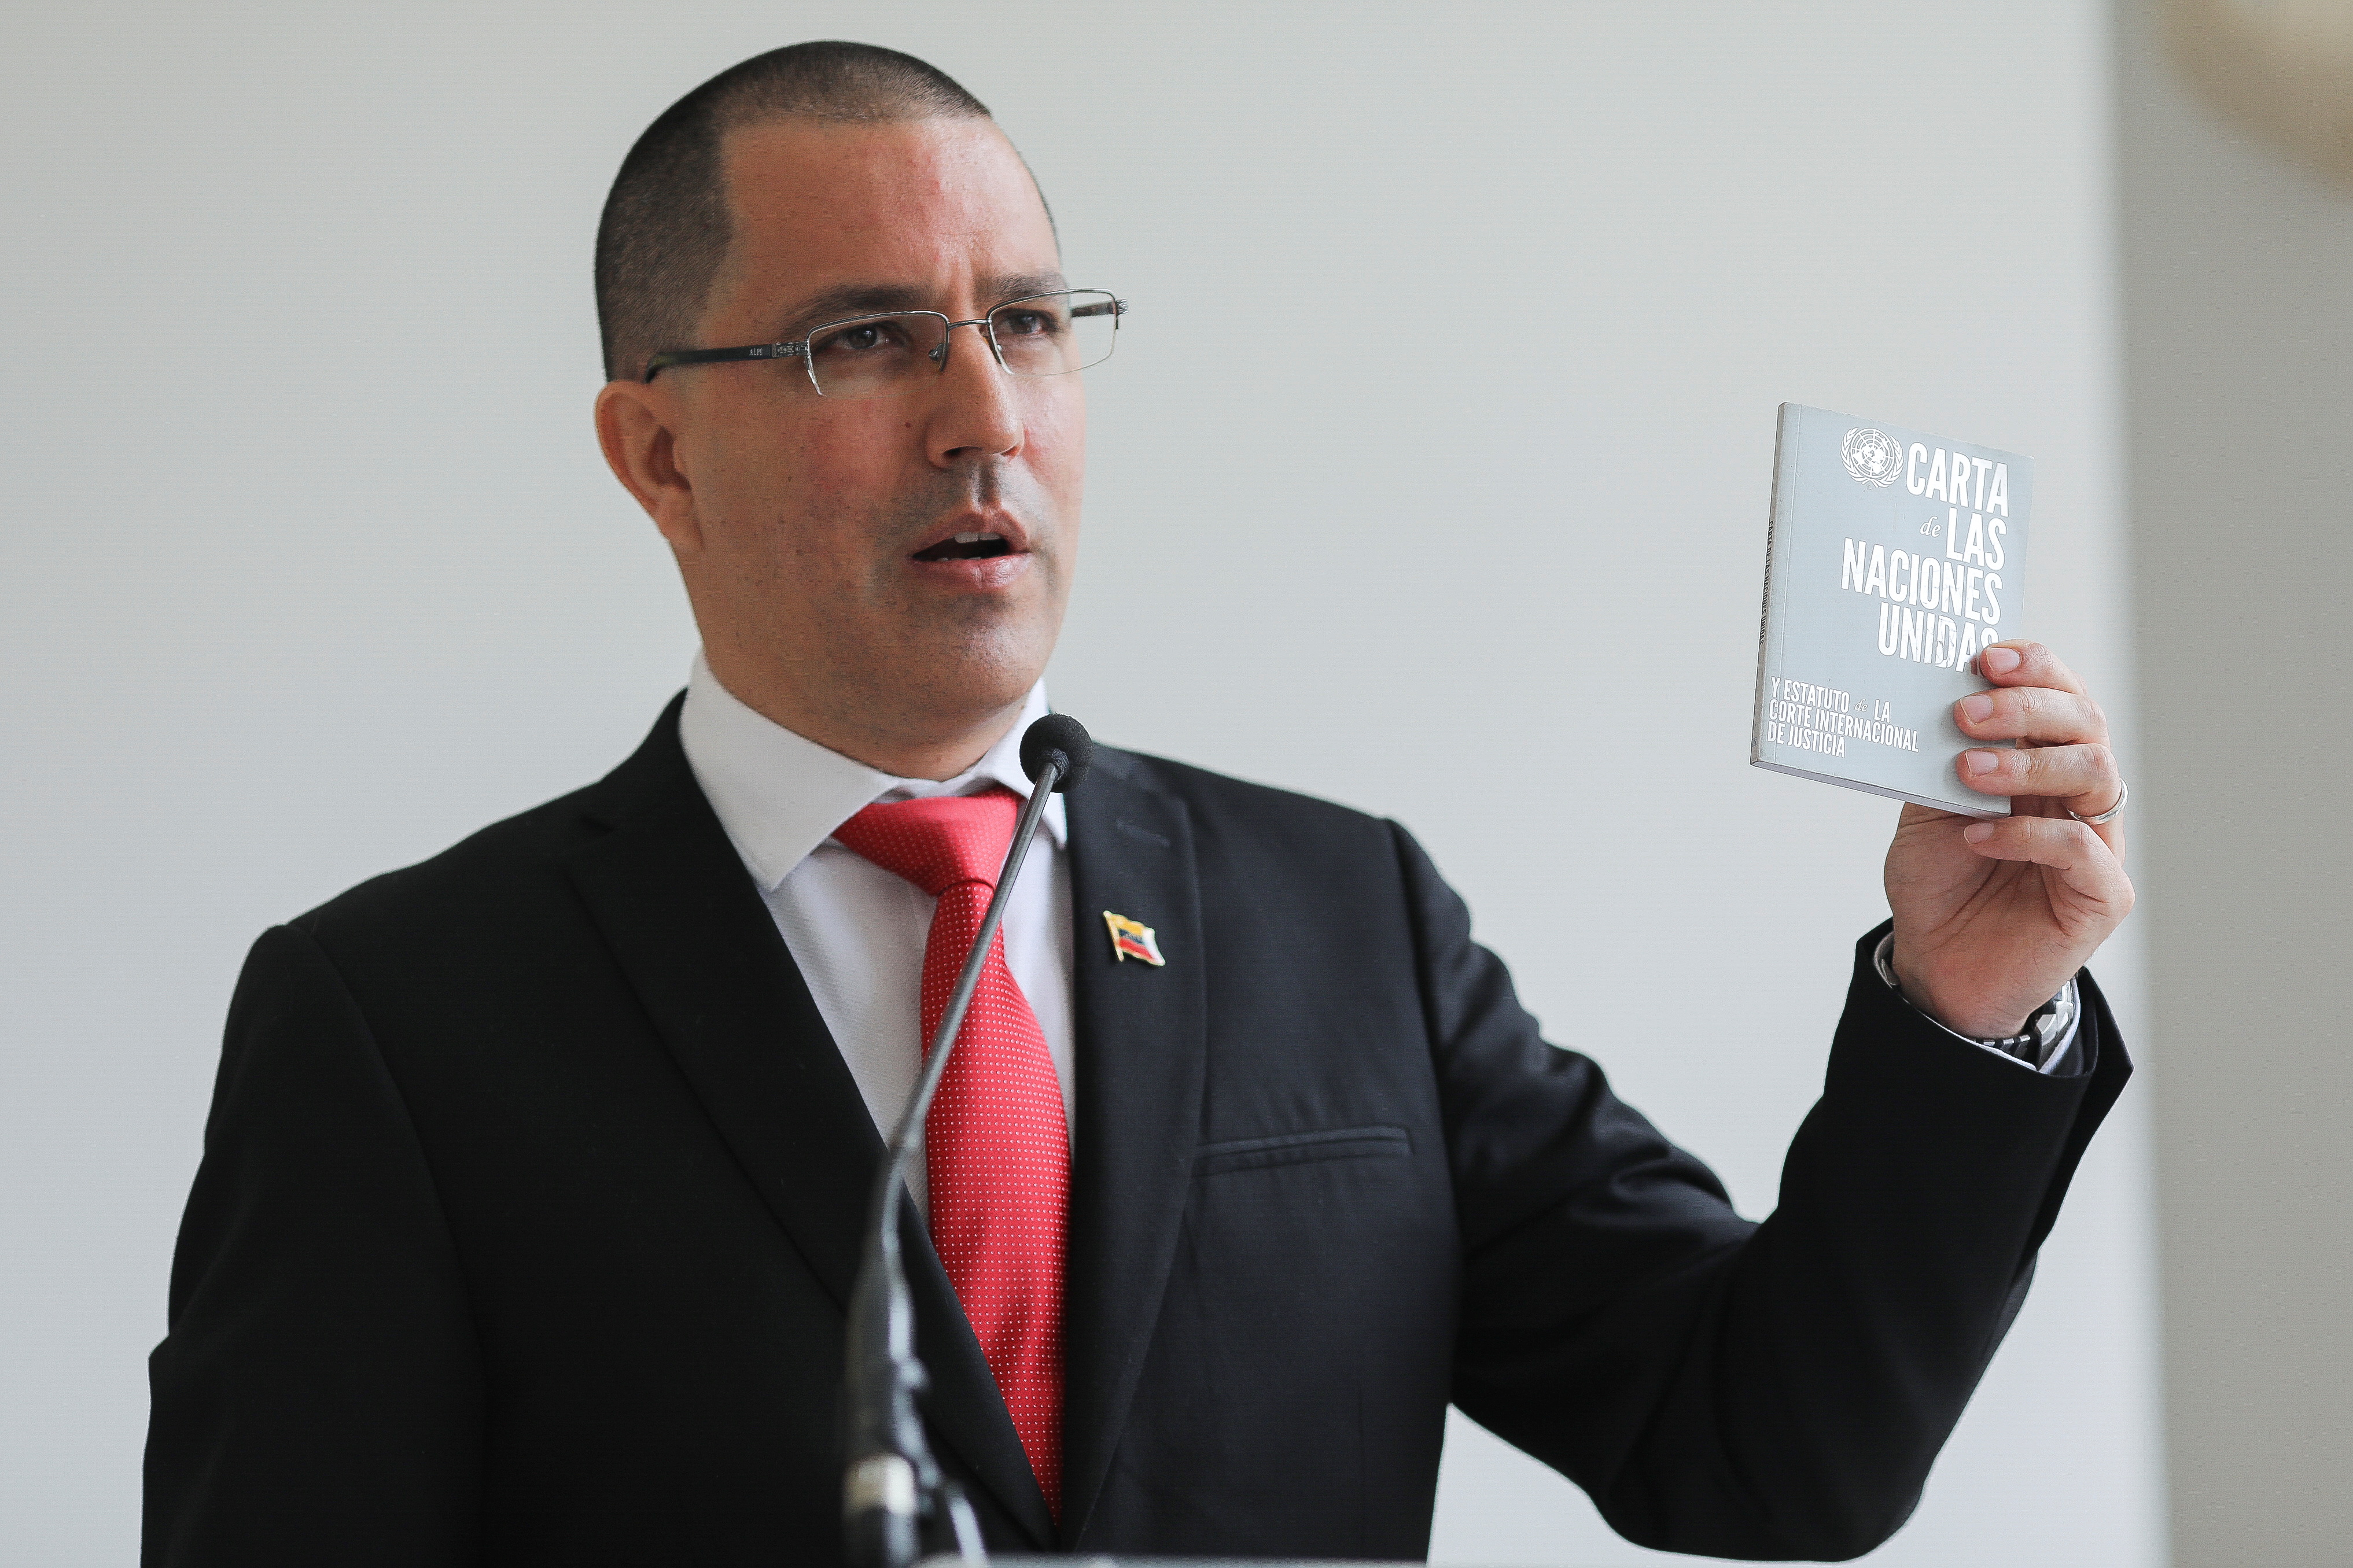 Venezuela's Foreign Minister Jorge Arreaza holds up the United Nations charter as he speaks to the media at the Foreign Ministry headquarters in Caracas, Venezuela February 24, 2021. REUTERS/Manaure Quintero